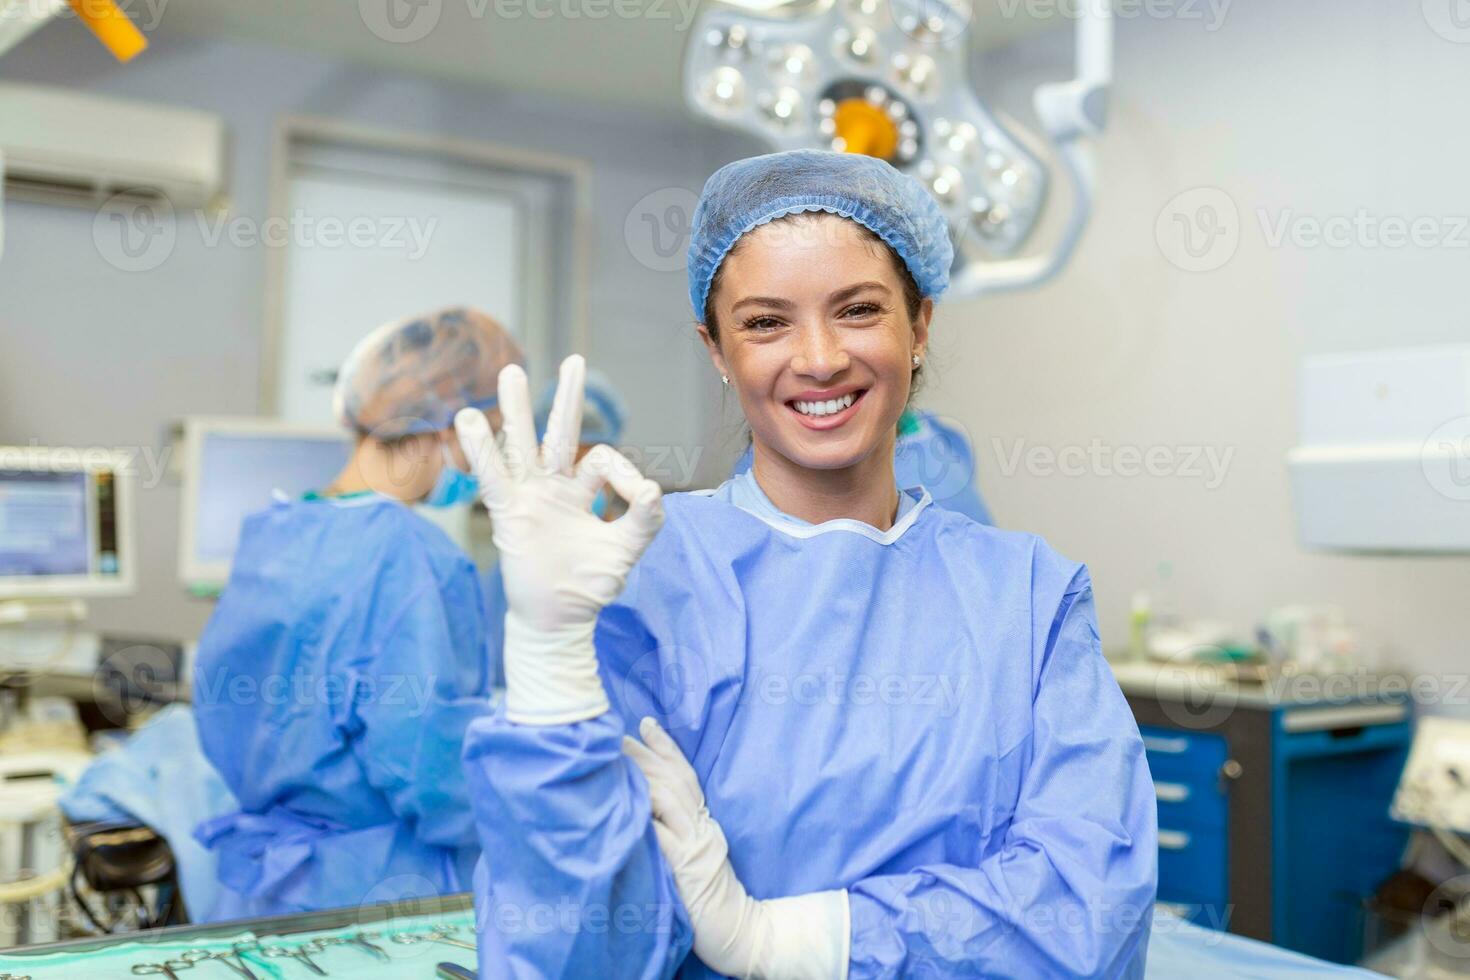 Portrait of female woman nurse surgeon OR staff member dressed in surgical scrubs gown mask and hair net in hospital operating room theater making eye contact smiling showing ok sign photo